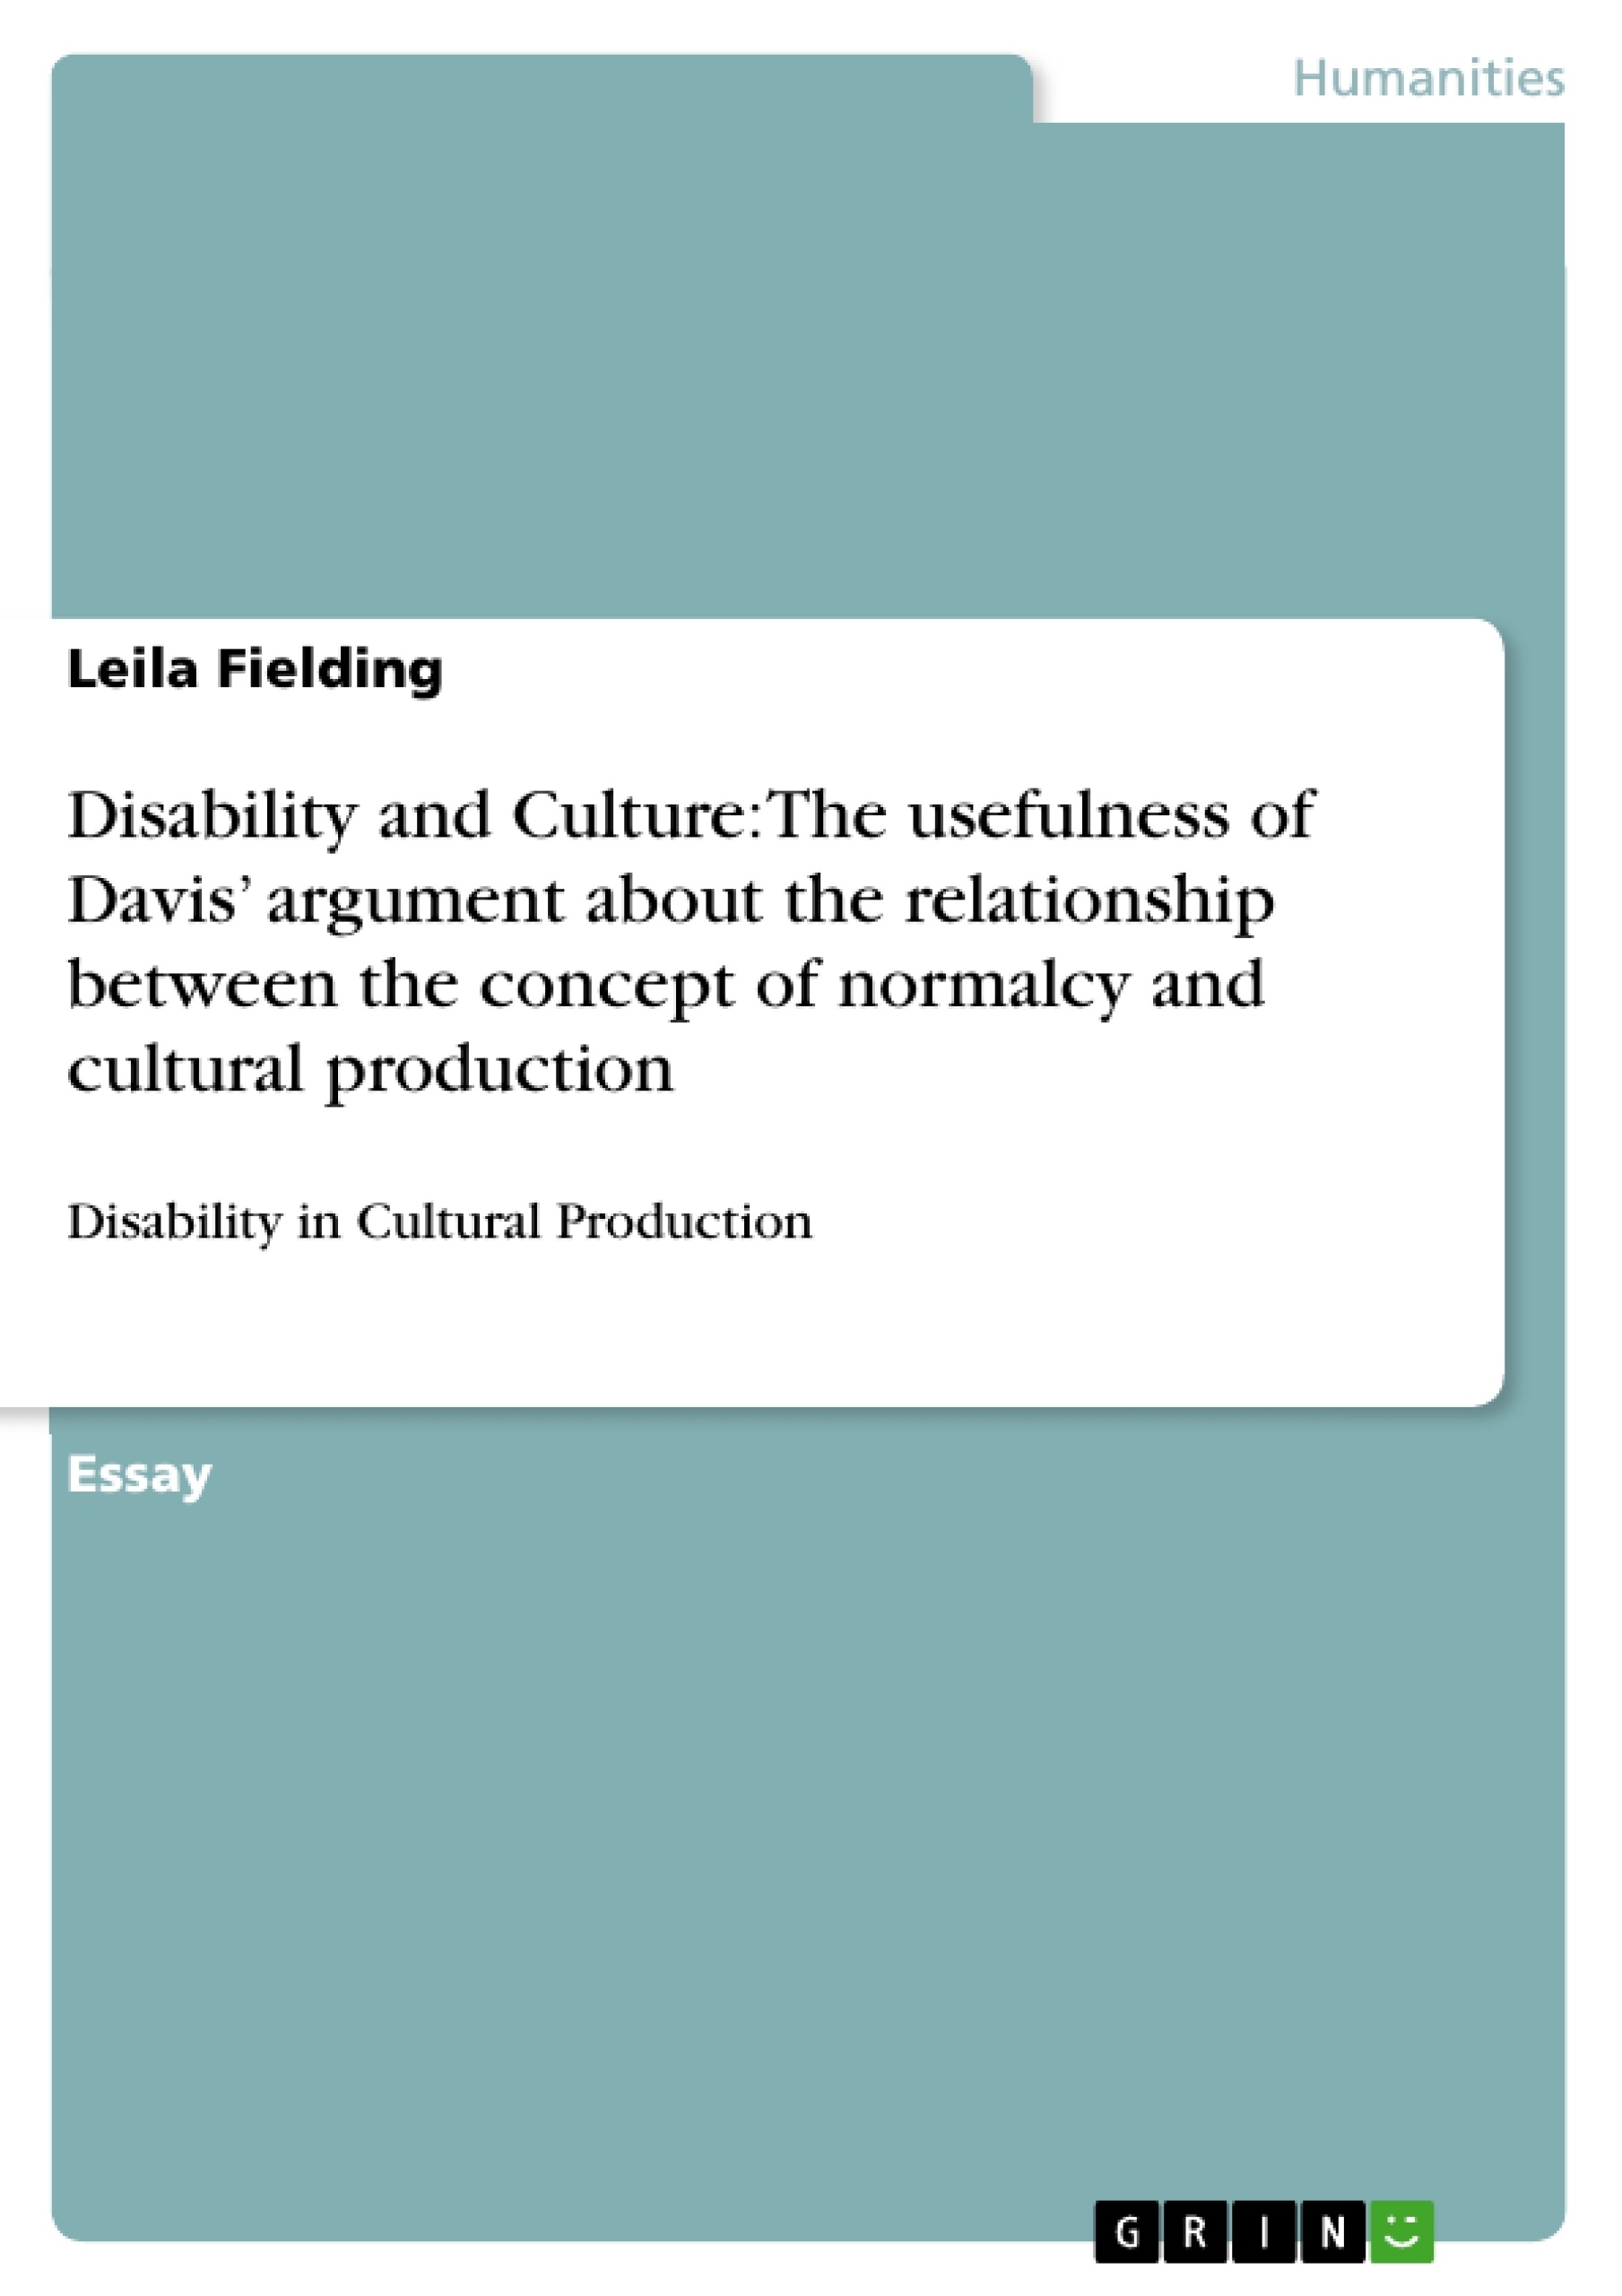 Titre: Disability and Culture: The usefulness of Davis’ argument about the relationship between the concept of normalcy and cultural production